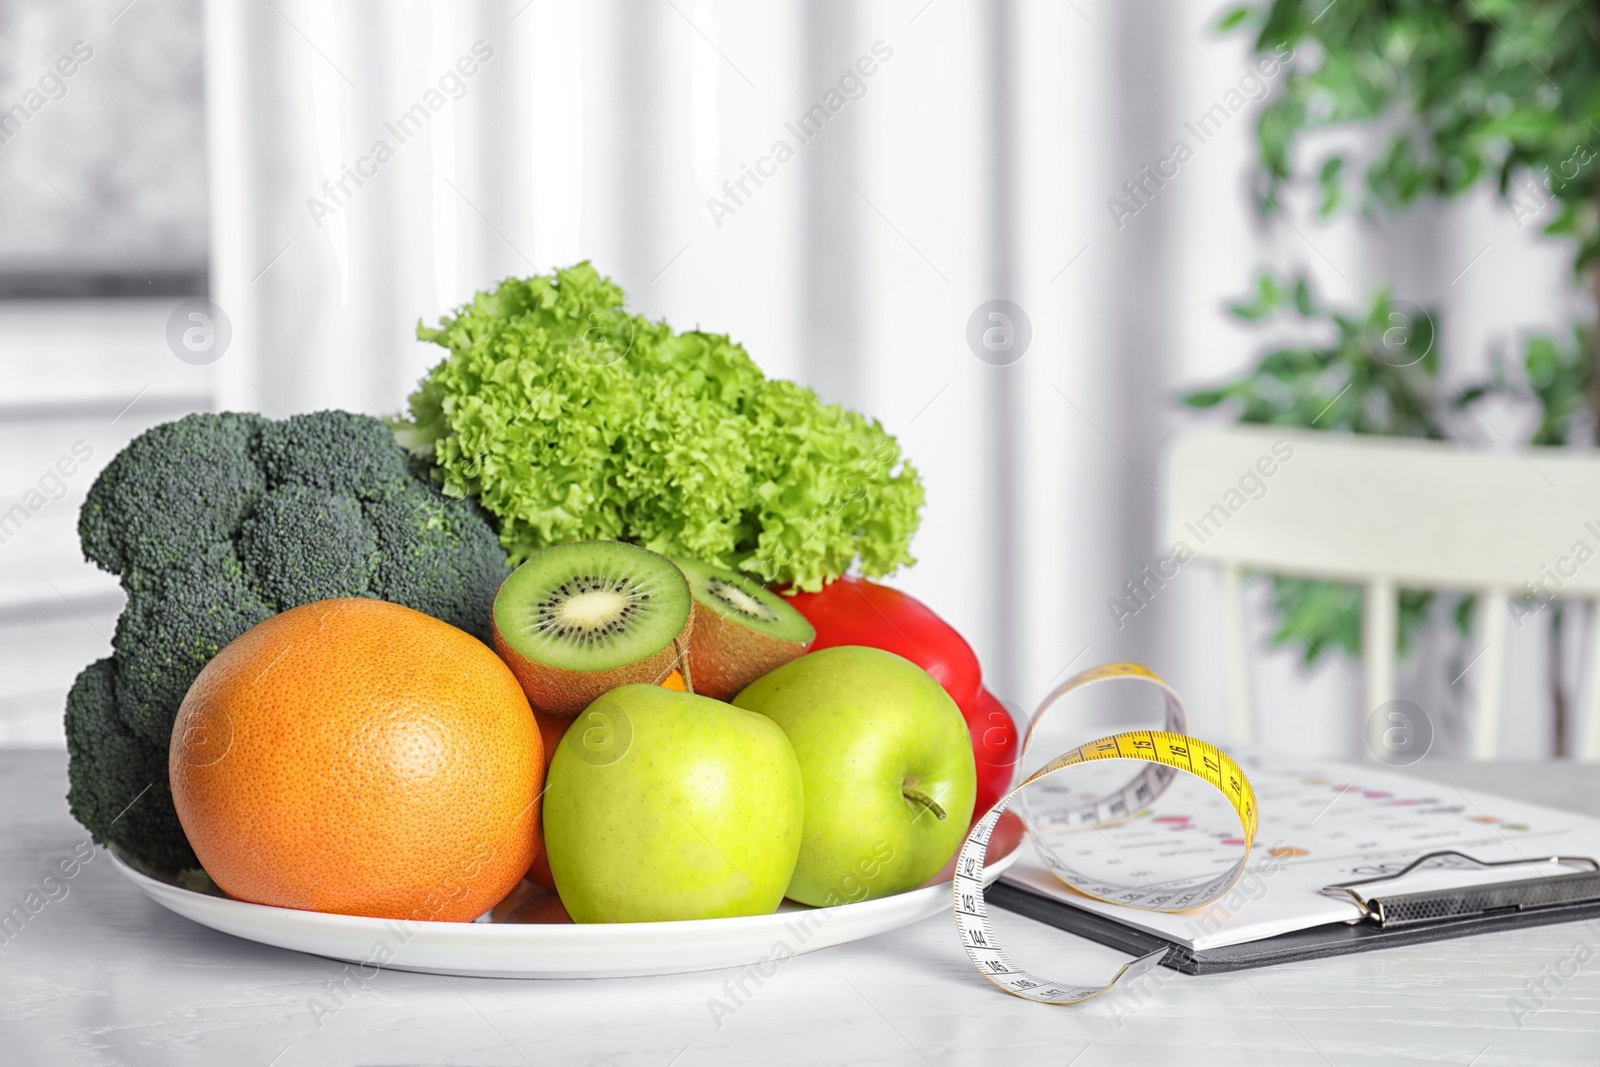 Photo of Measuring tape, vegetables and fruits on table. Diet plan from nutritionist